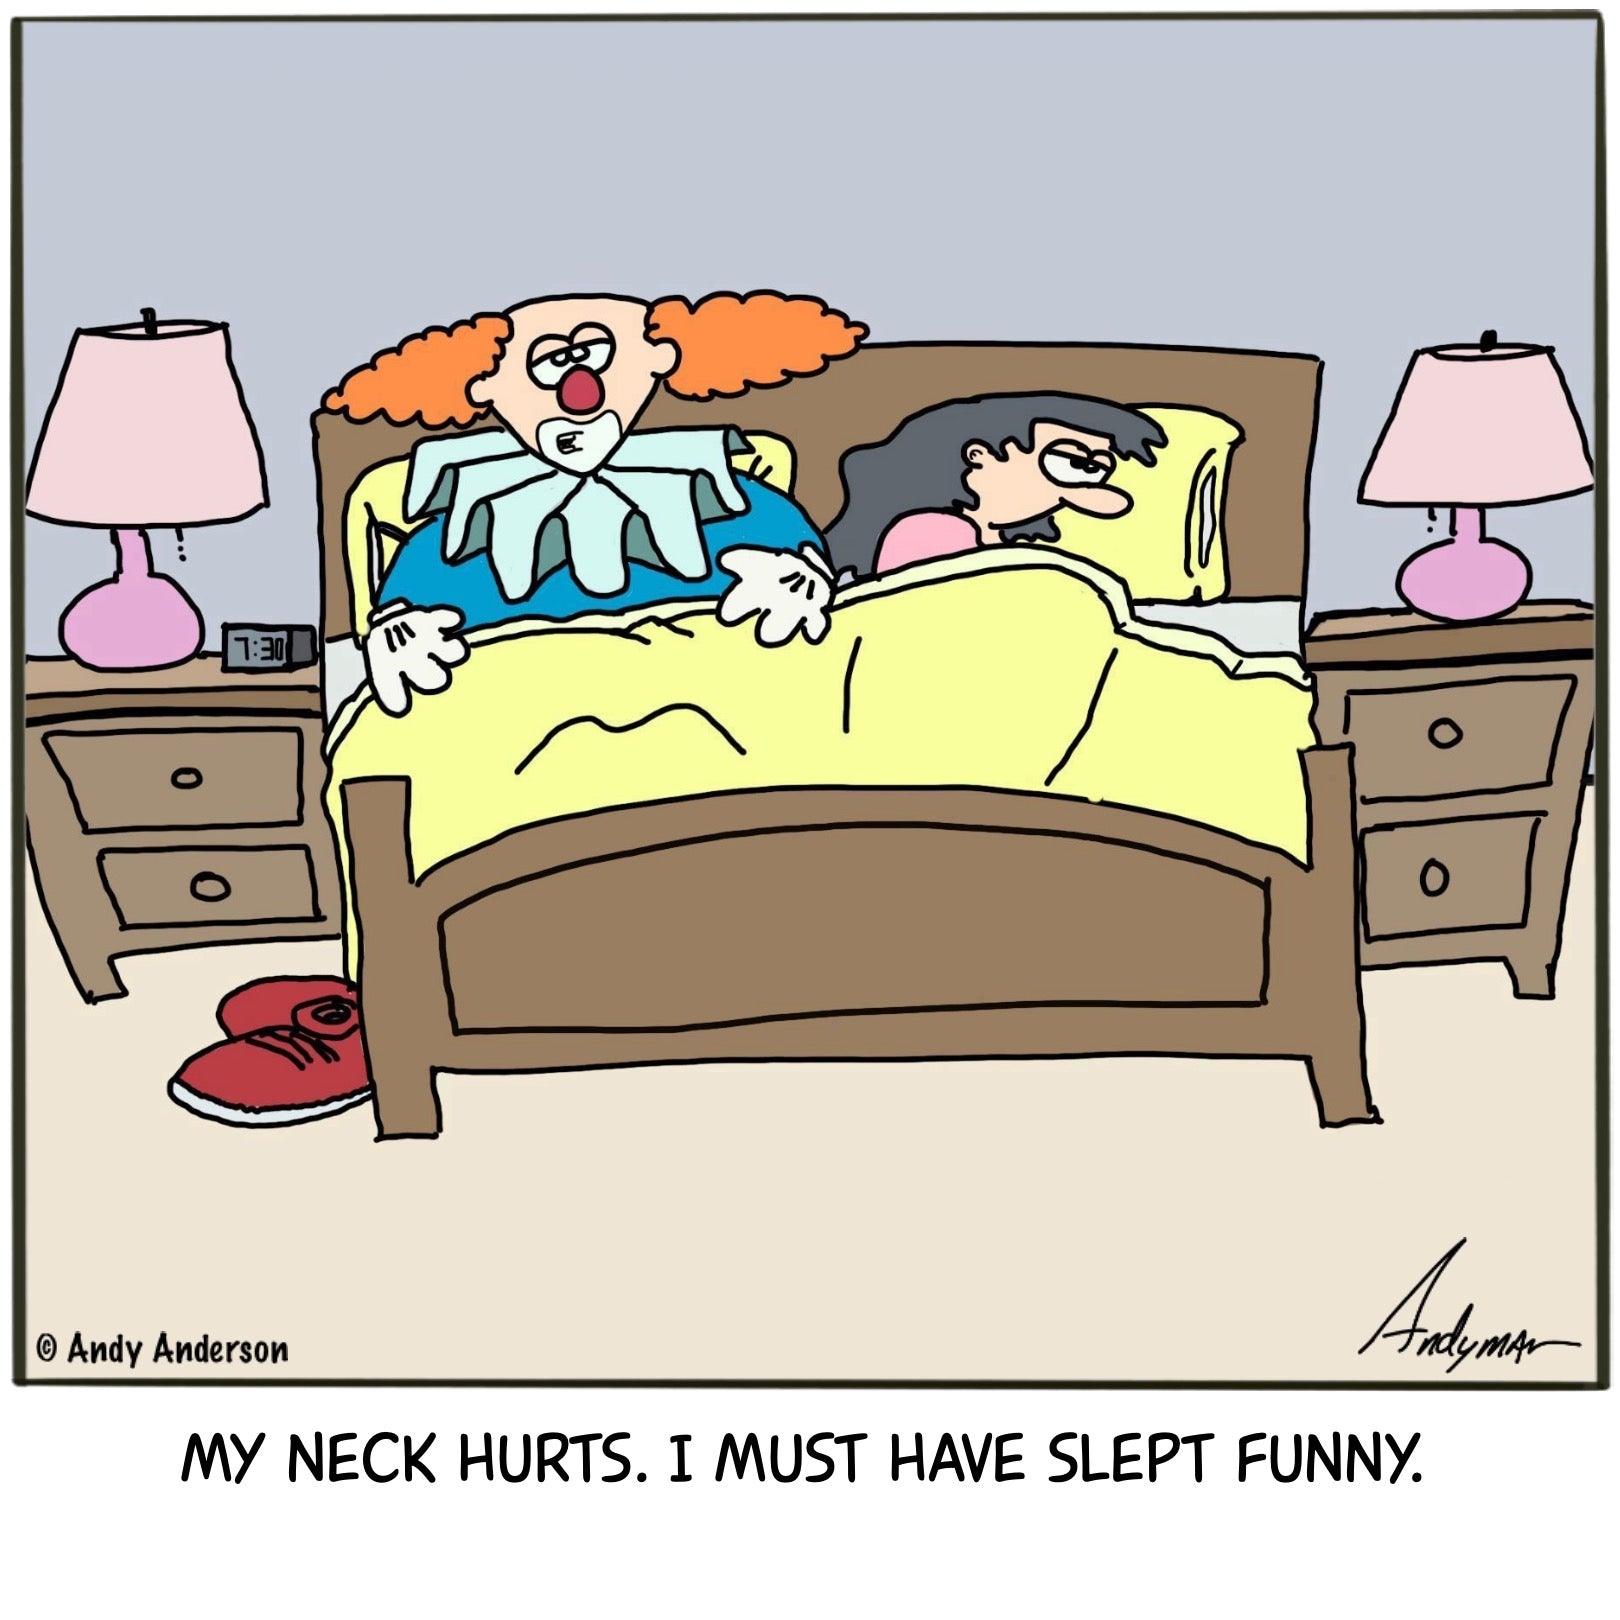 Slept funny cartoon by Andy Anderson